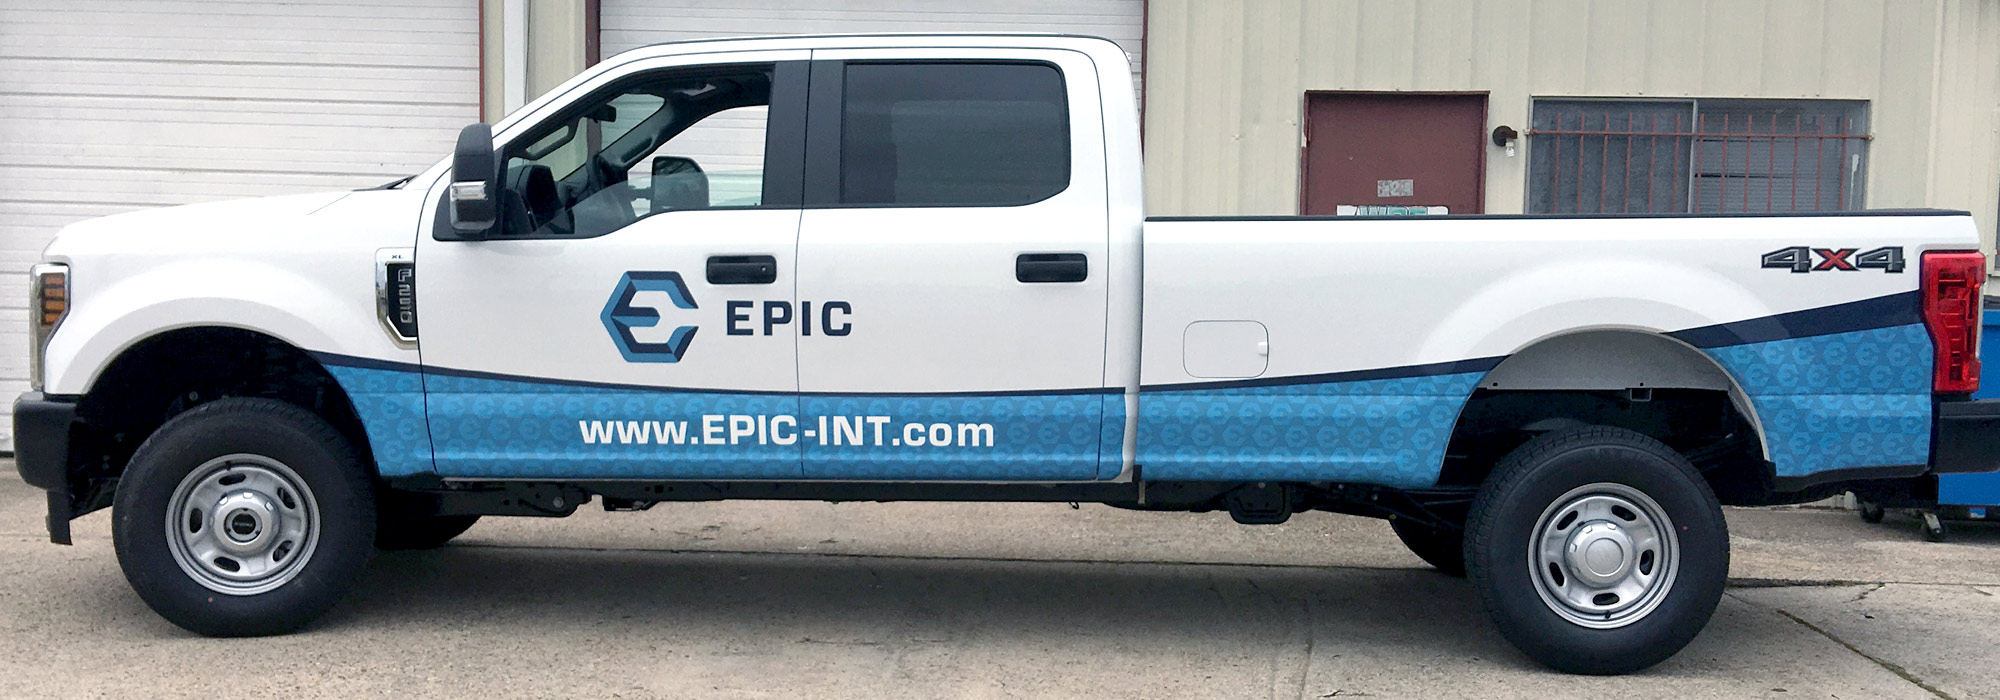 Vehicle Graphics on Small Truck